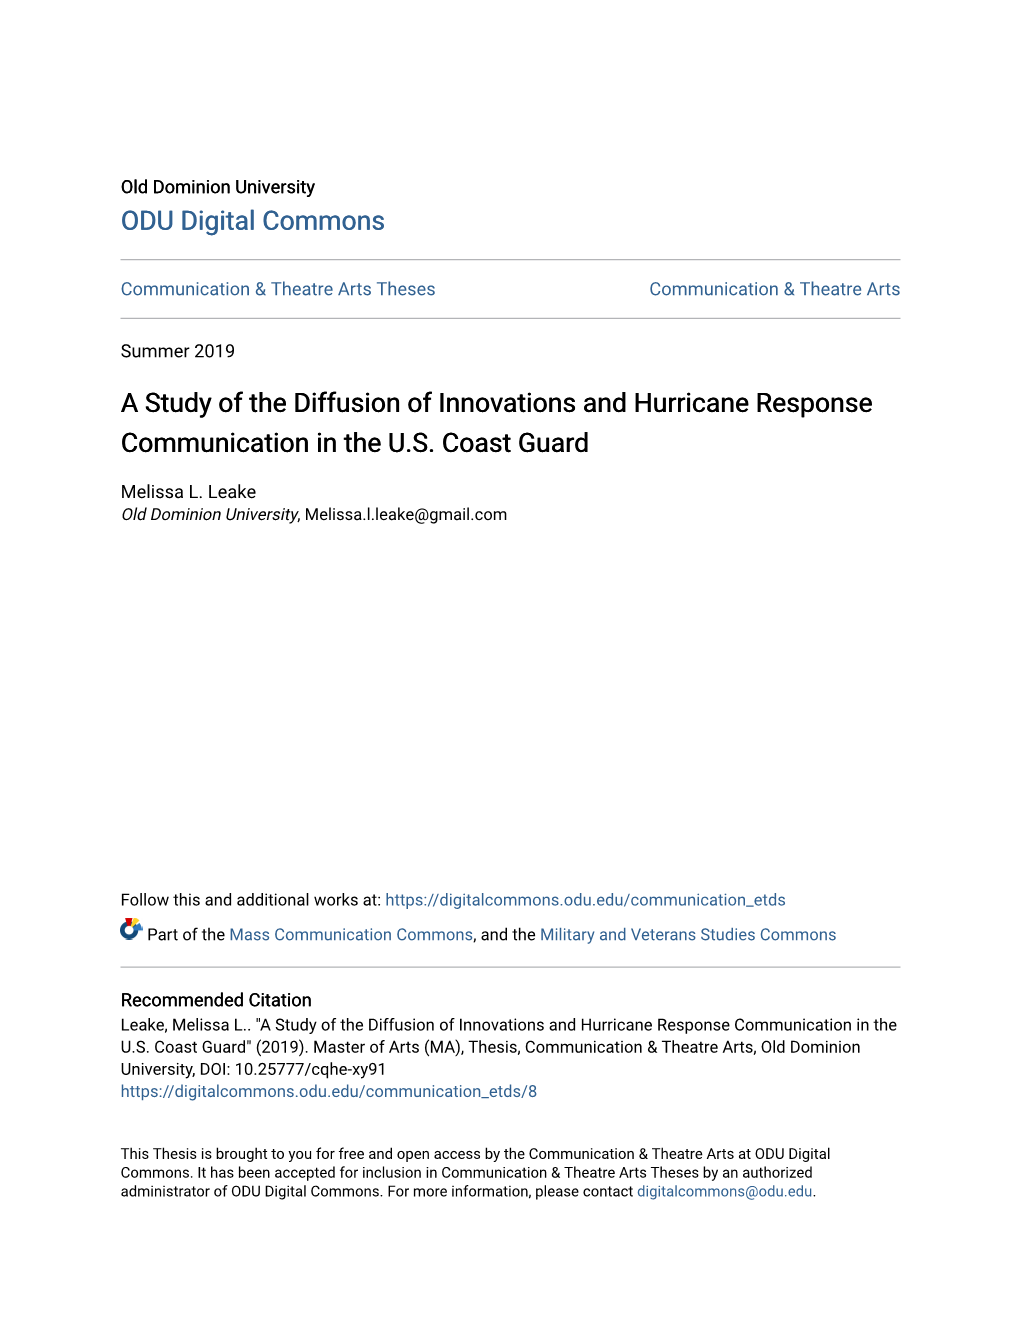 A Study of the Diffusion of Innovations and Hurricane Response Communication in the U.S